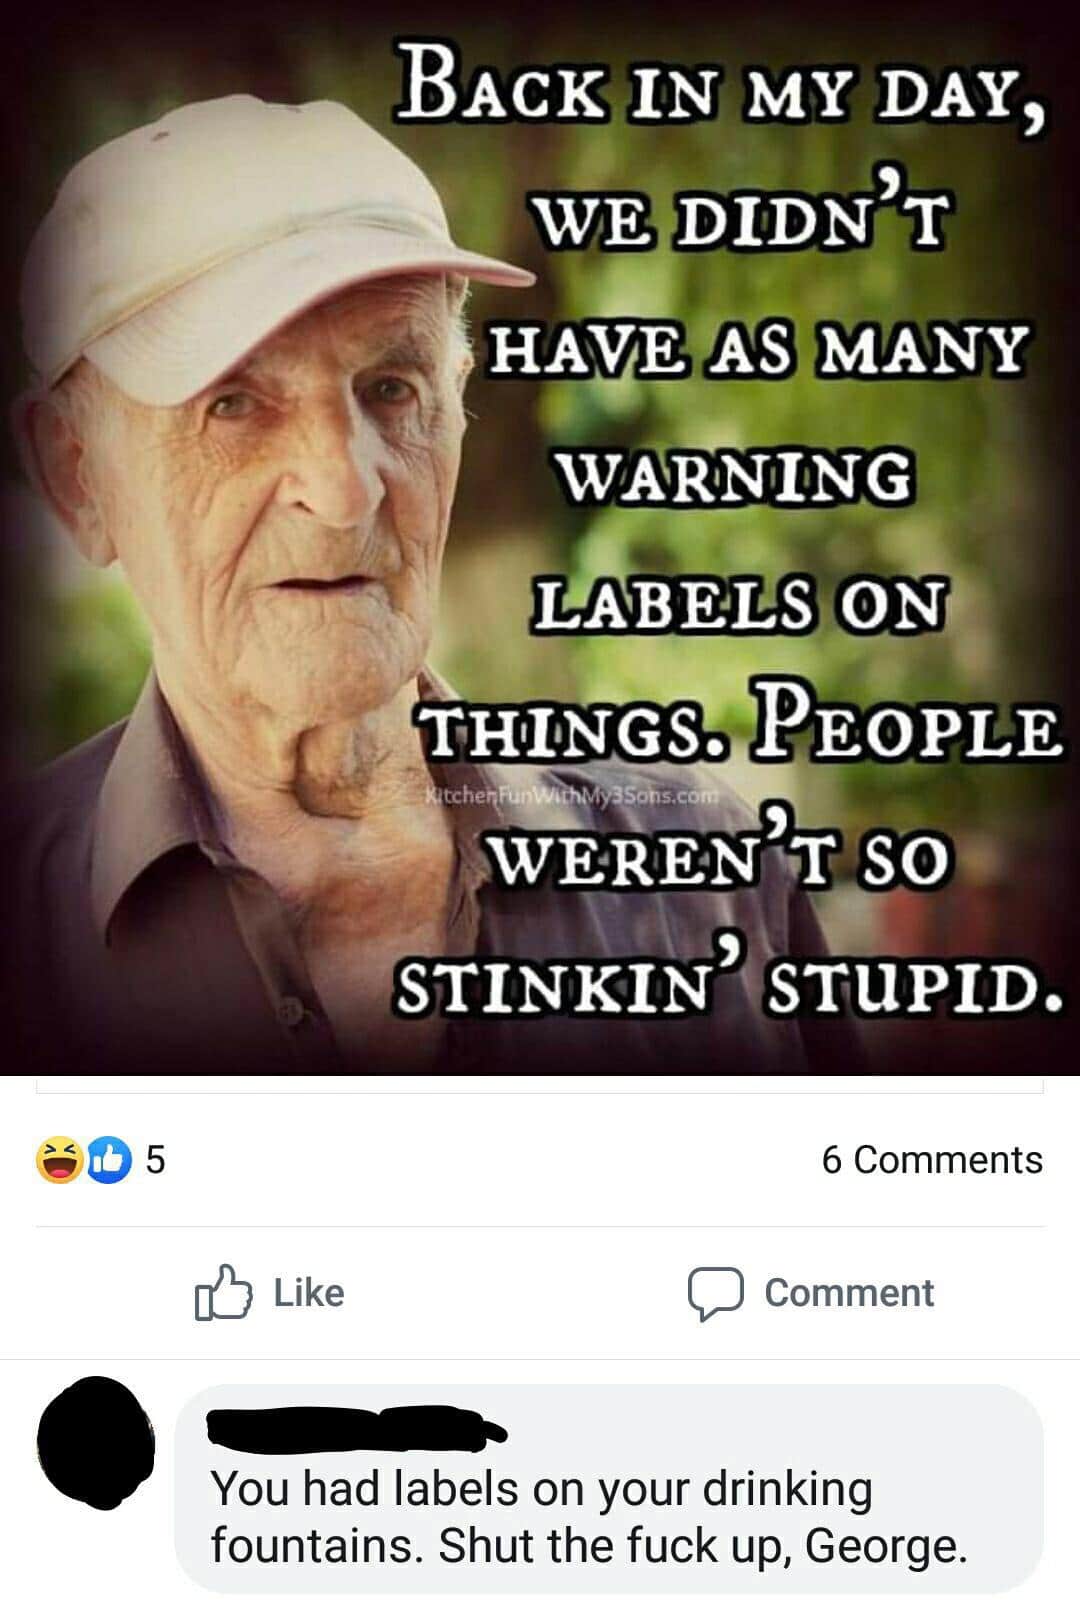 boomer boomer-memes boomer text: Like BACKIIN MY DAY, WE DIDNfT HAVE AS MANY WARNING LAB LLSi ON tche y3Sobs.com SO STINKIN'GTUPID. 6 Comments C) Comment You had labels on your drinking fountains. Shut the fuck up, George. 